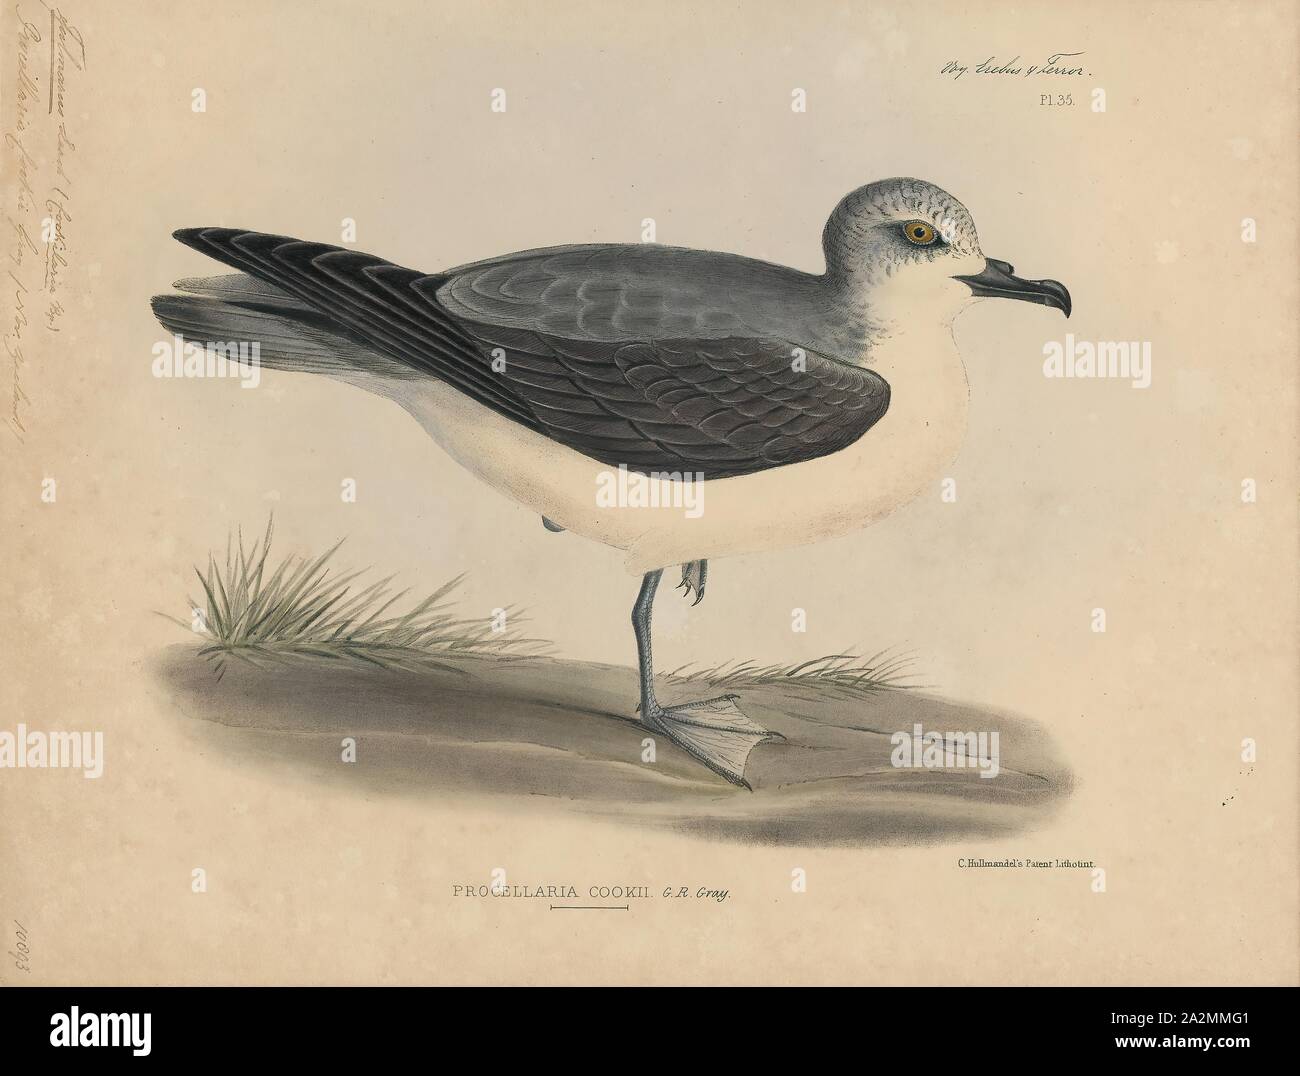 Fulmarus cookii, Print, Fulmar, The fulmars are tubenosed seabirds of the family Procellariidae. The family consists of two extant species and two extinct fossil species from the Miocene., 1845-1848 Stock Photo